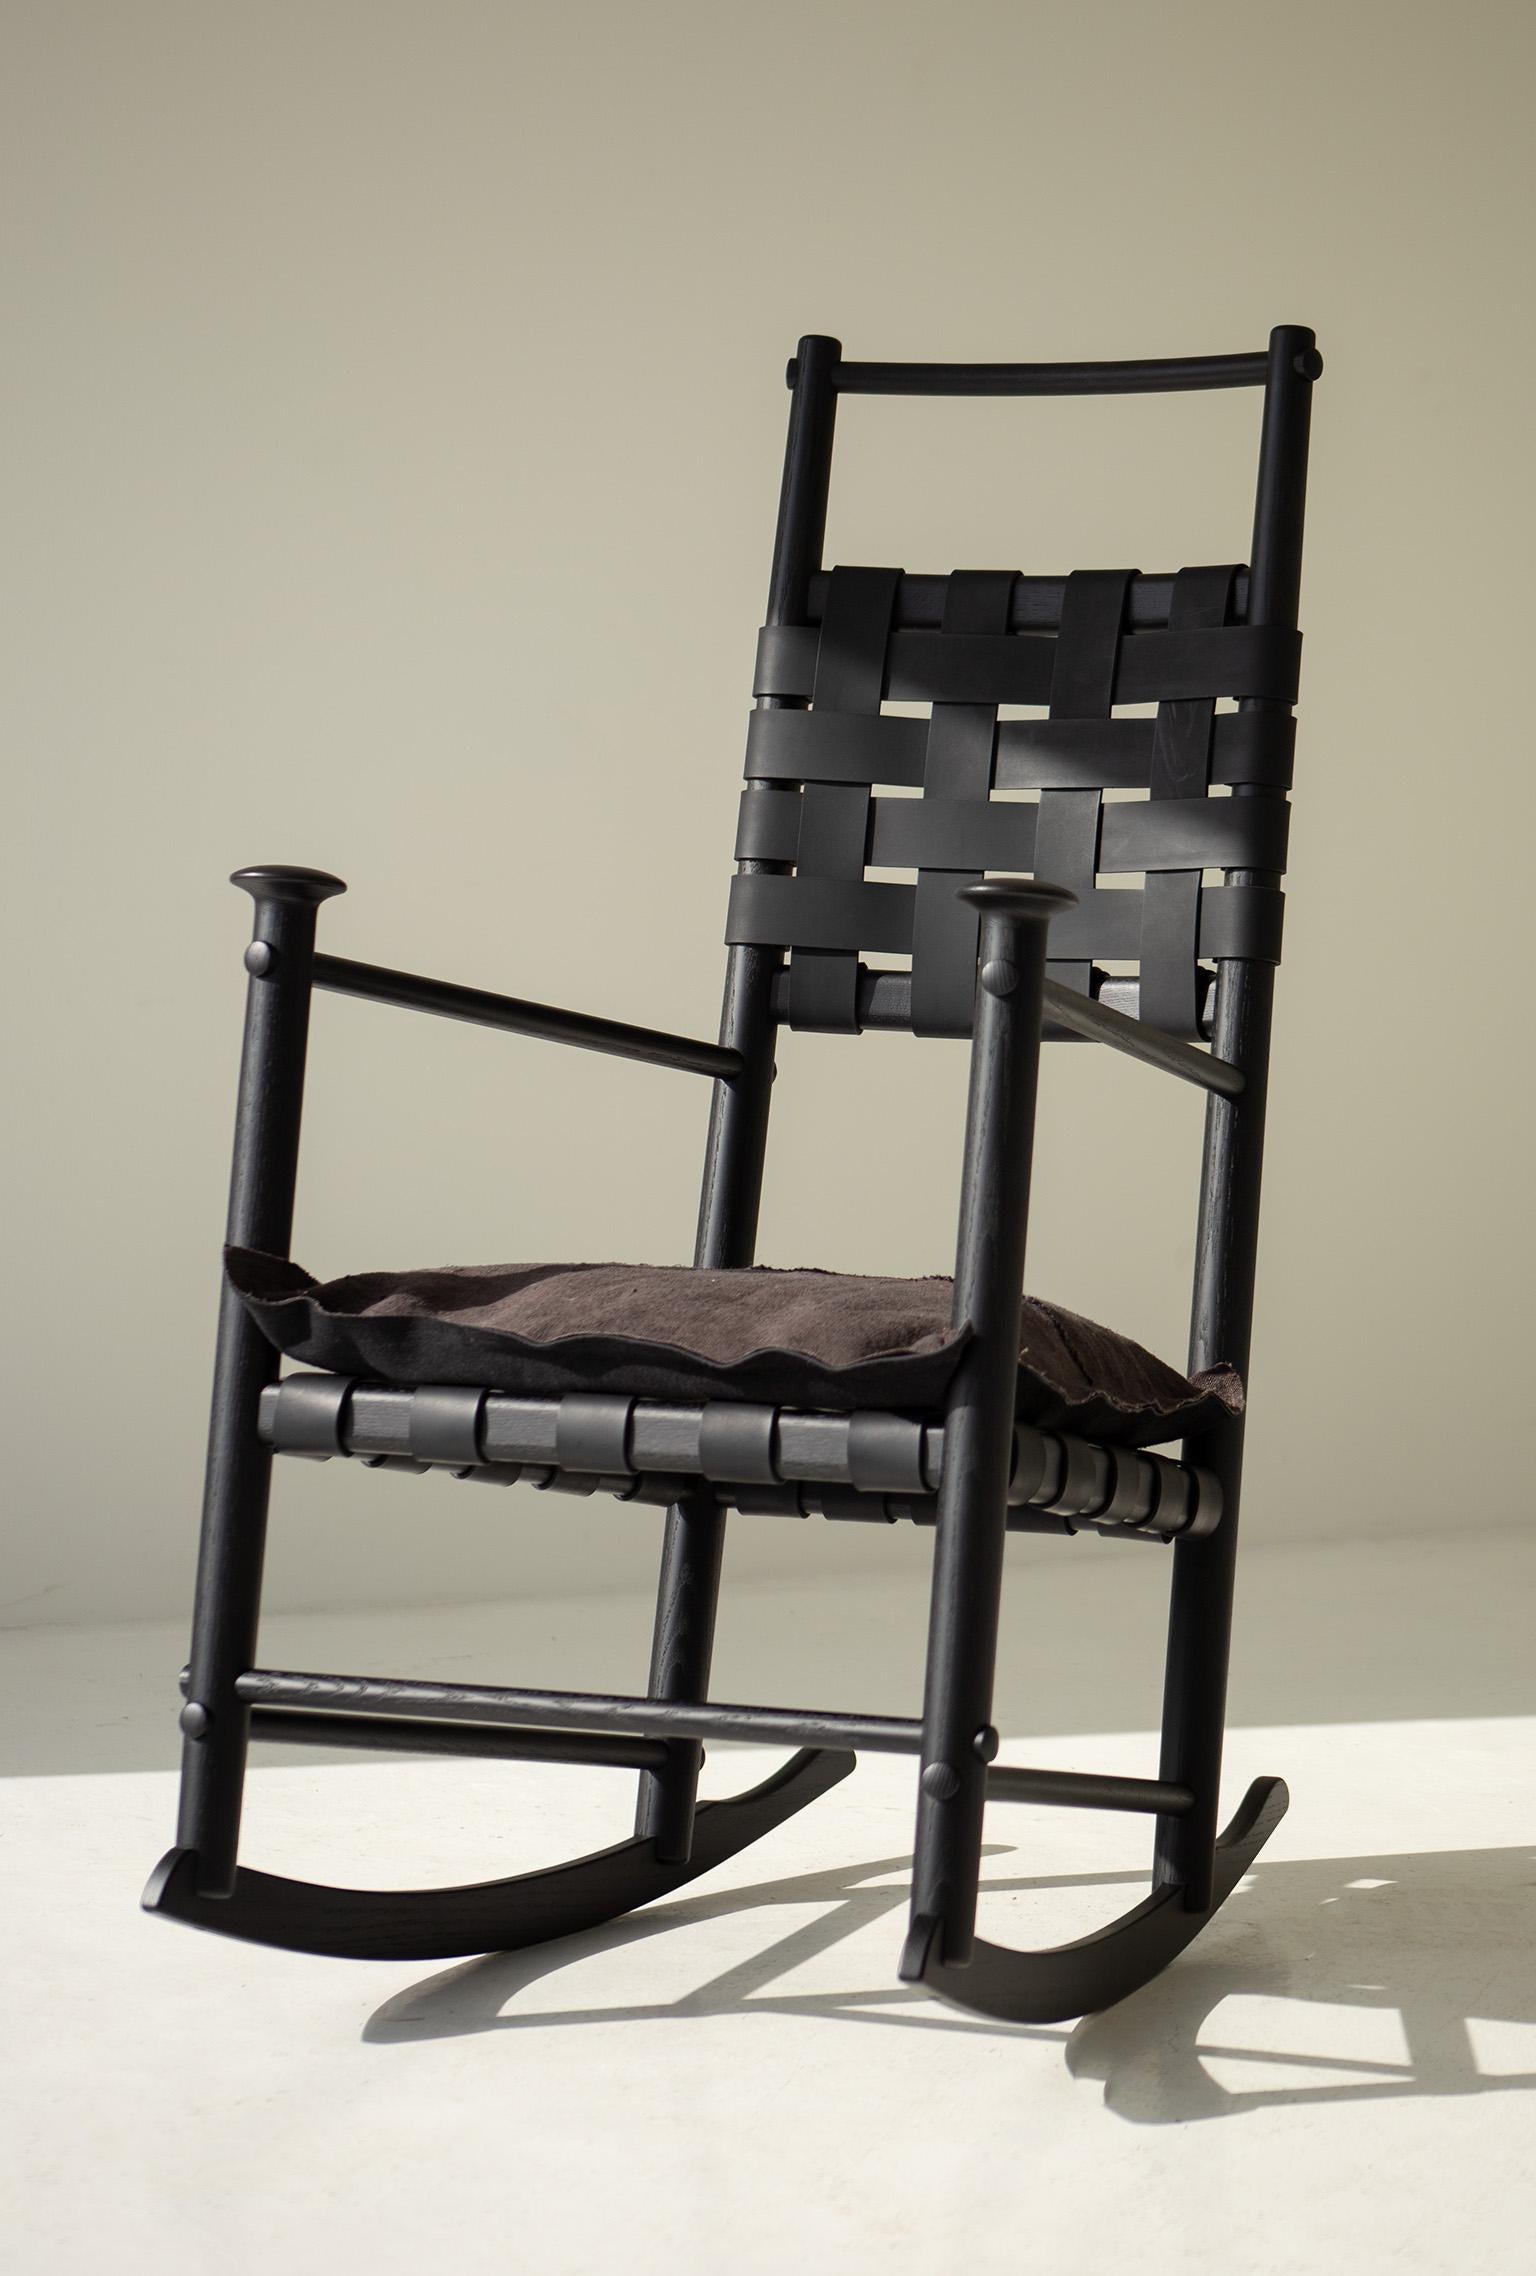 Catawba rocking chair, Modern leather rocking chair, black, for Craft Associates

This Catawba Rocking Chair for Craft Associates® Furniture are expertly crafted. The sides tables are constructed from solid hardwood by hand, not machine. The oak